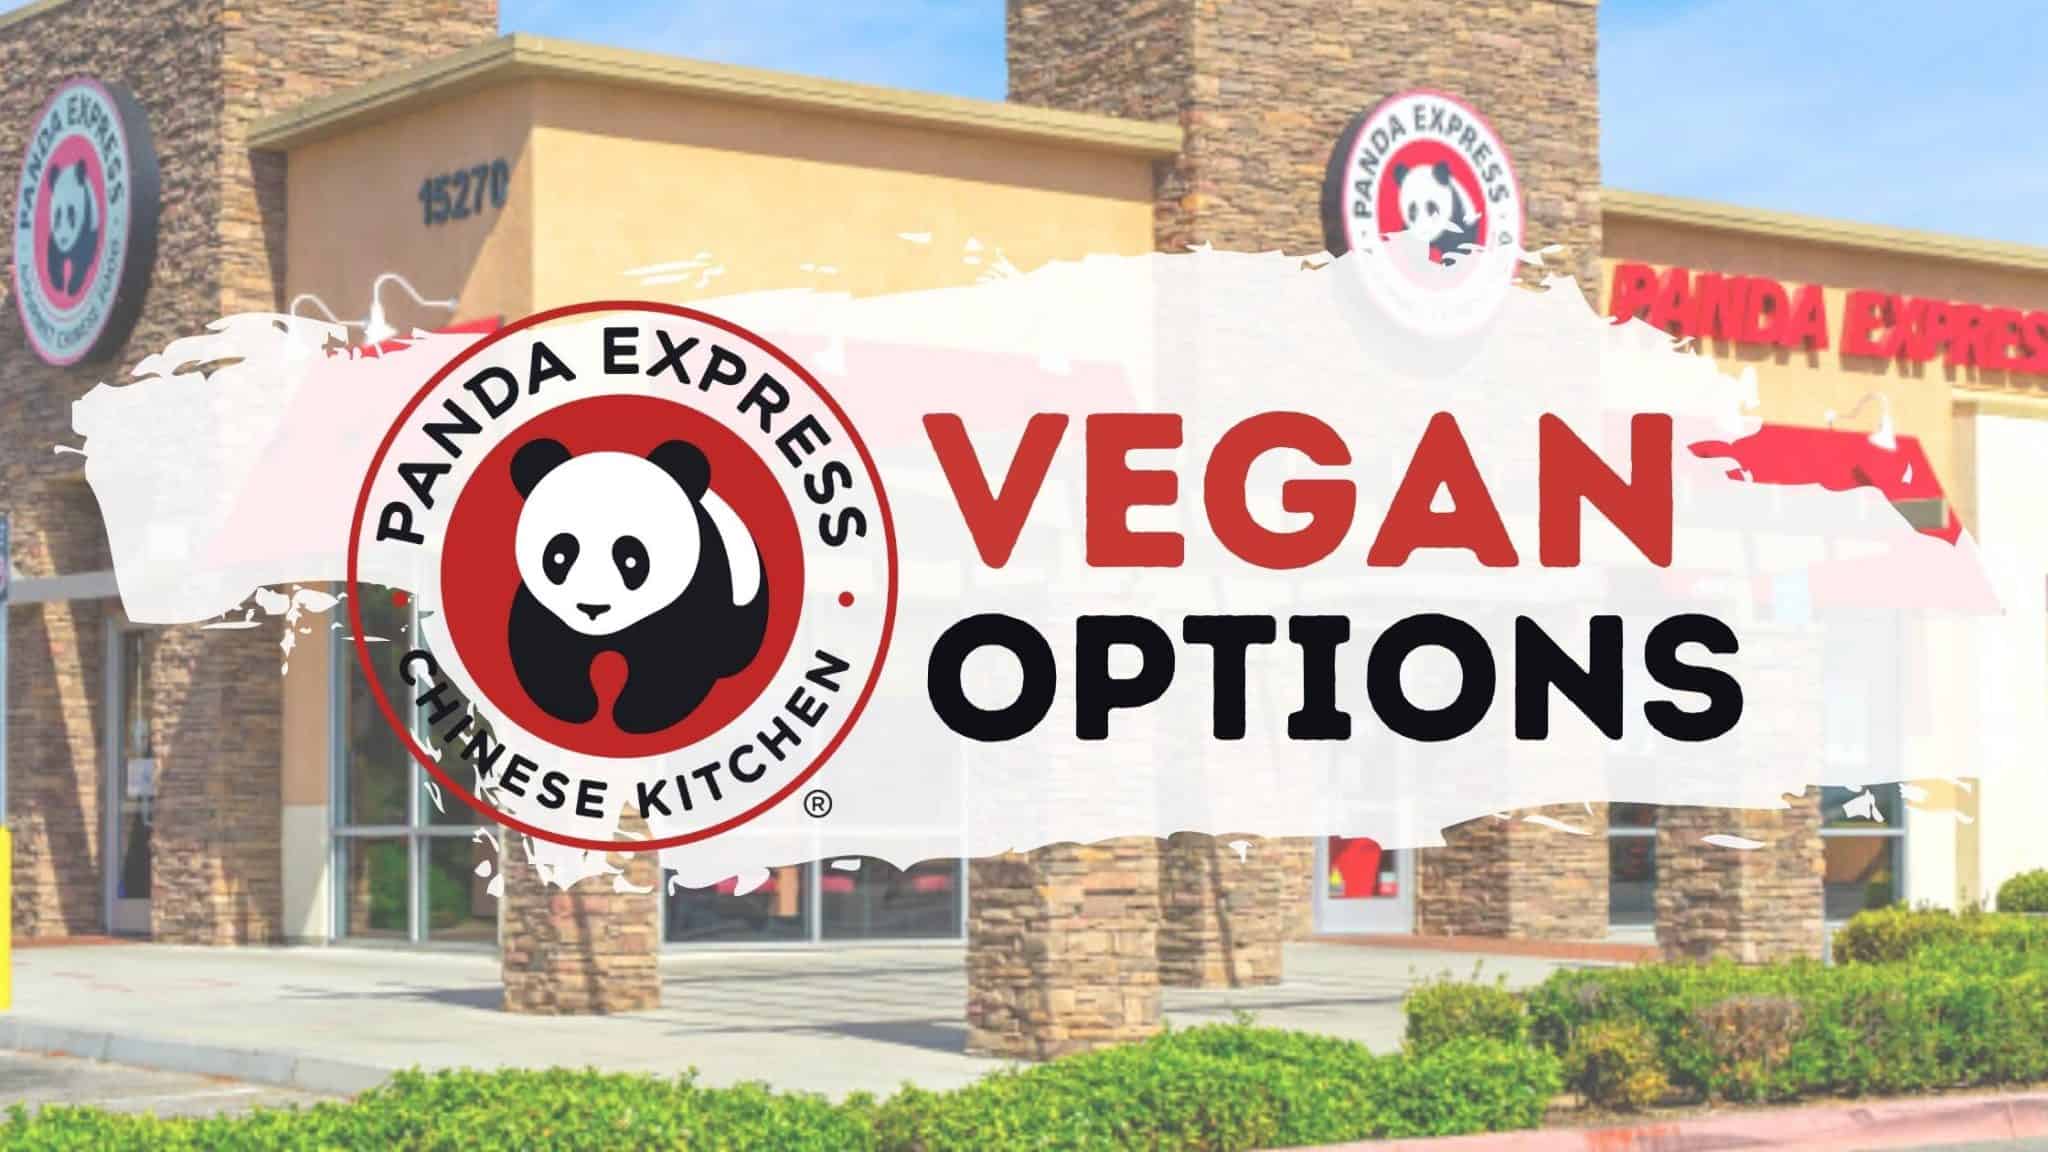 Vegan Panda Express Options—Your Guide to Ordering Dairy Free and Plant Based Chinese Fast Food